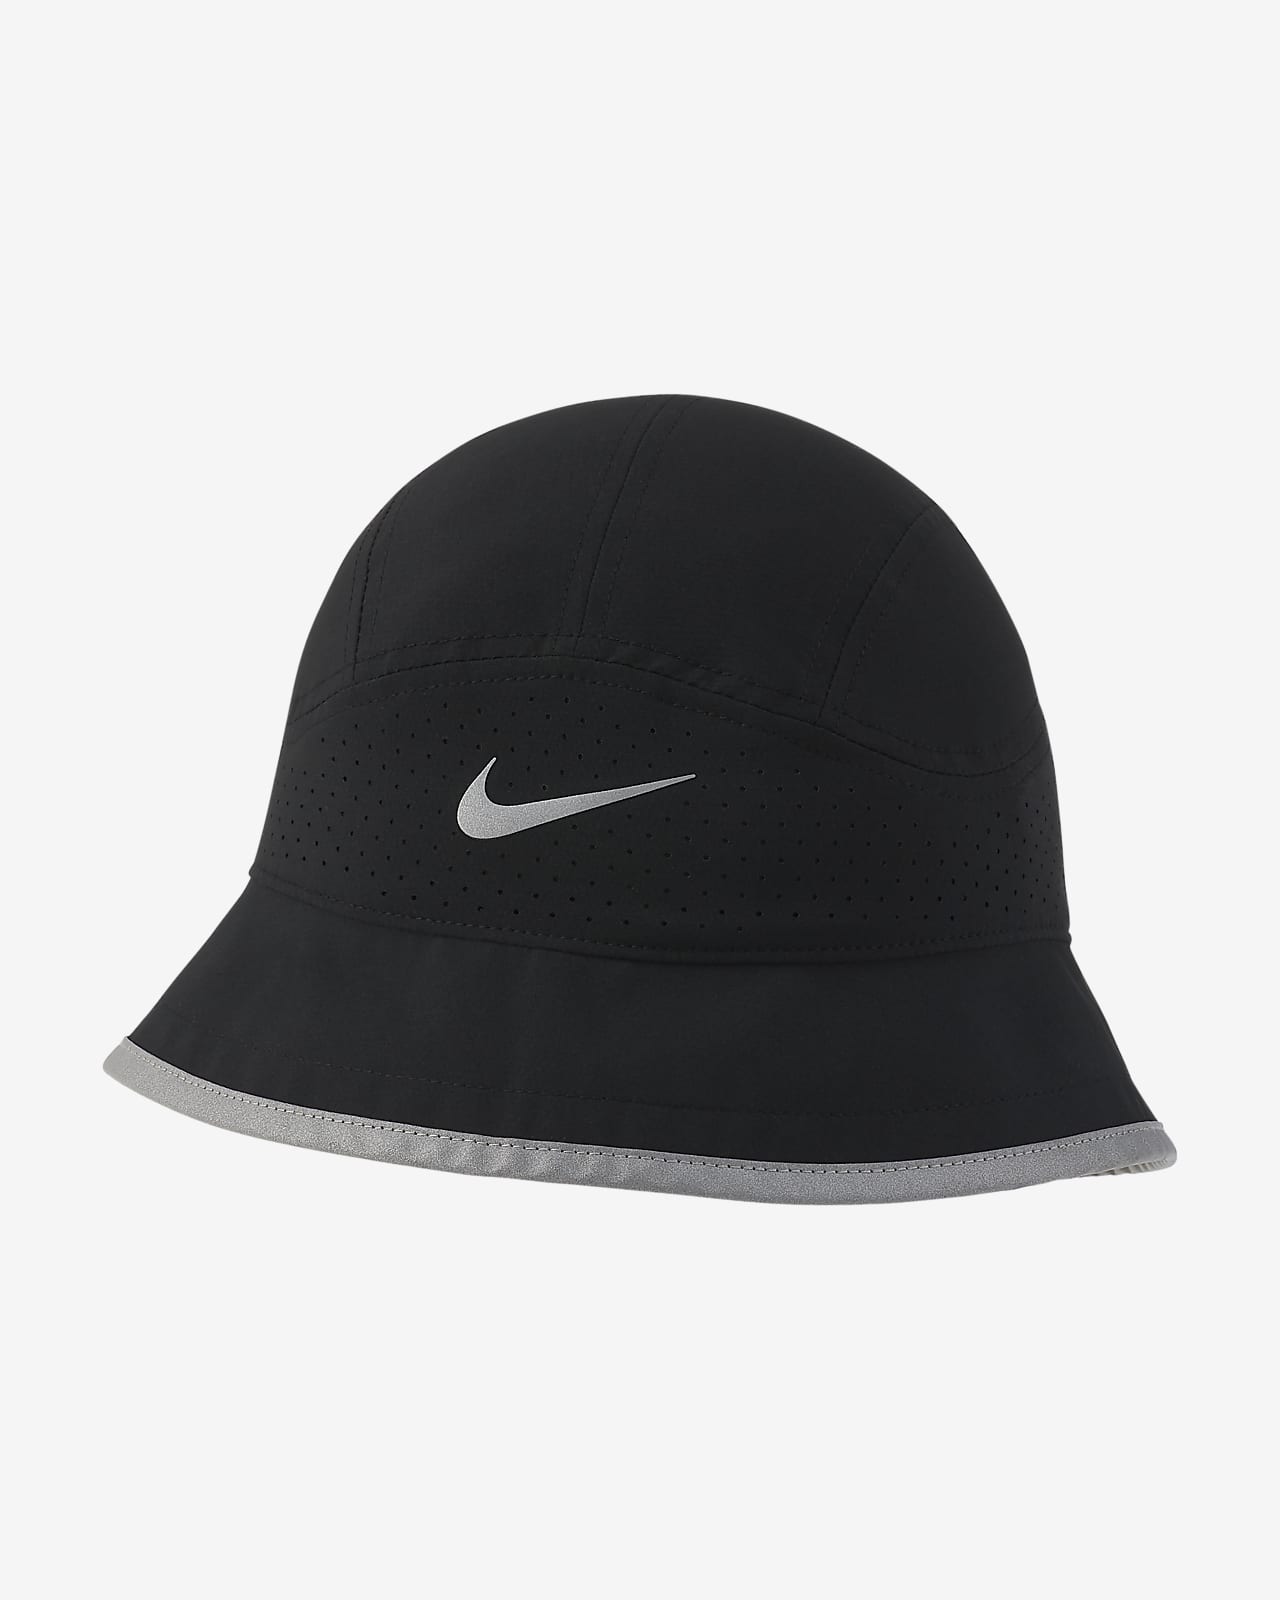 Resume Fumble means Nike Dri-FIT Perforated Running Bucket Hat. Nike.com